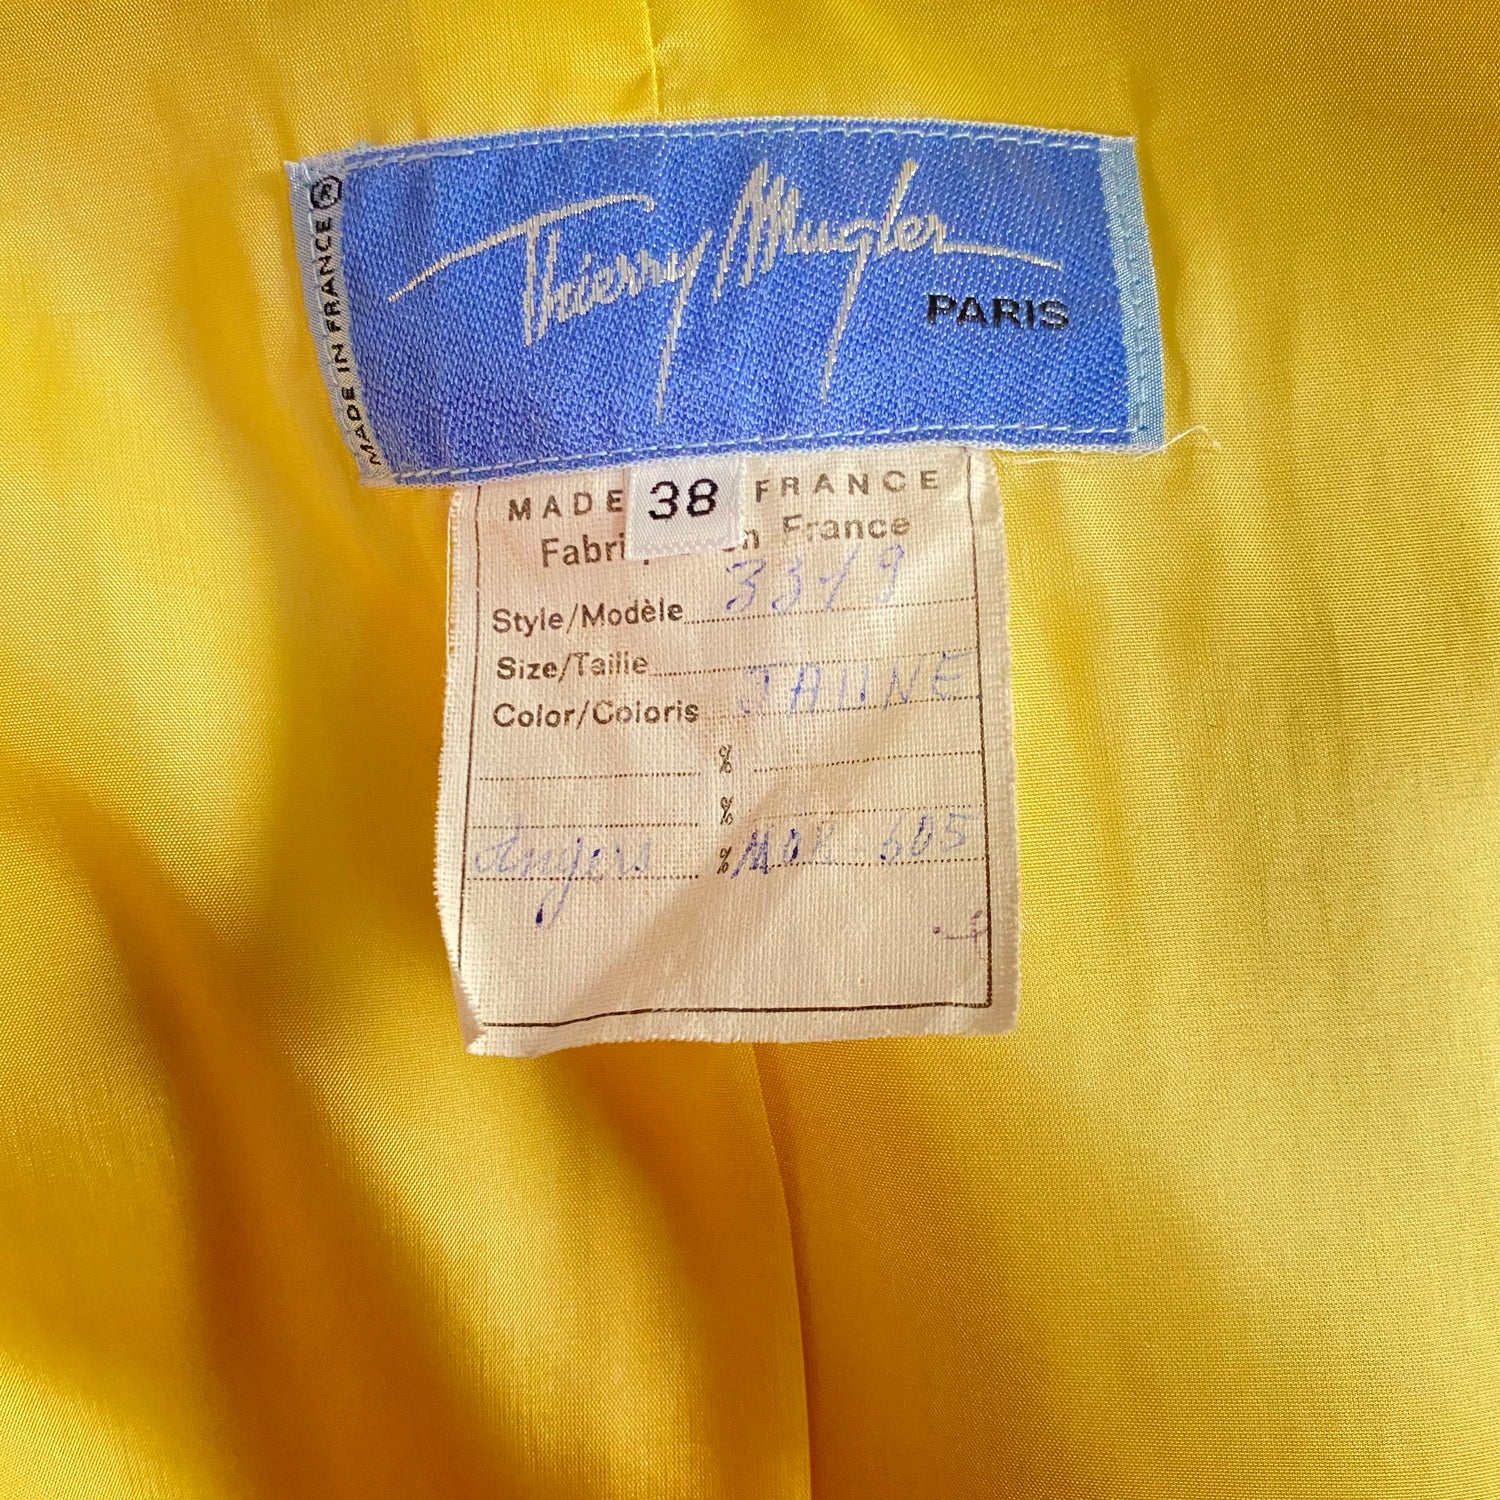 Thierry Mugler vintage yellow jacket - S - 1990s